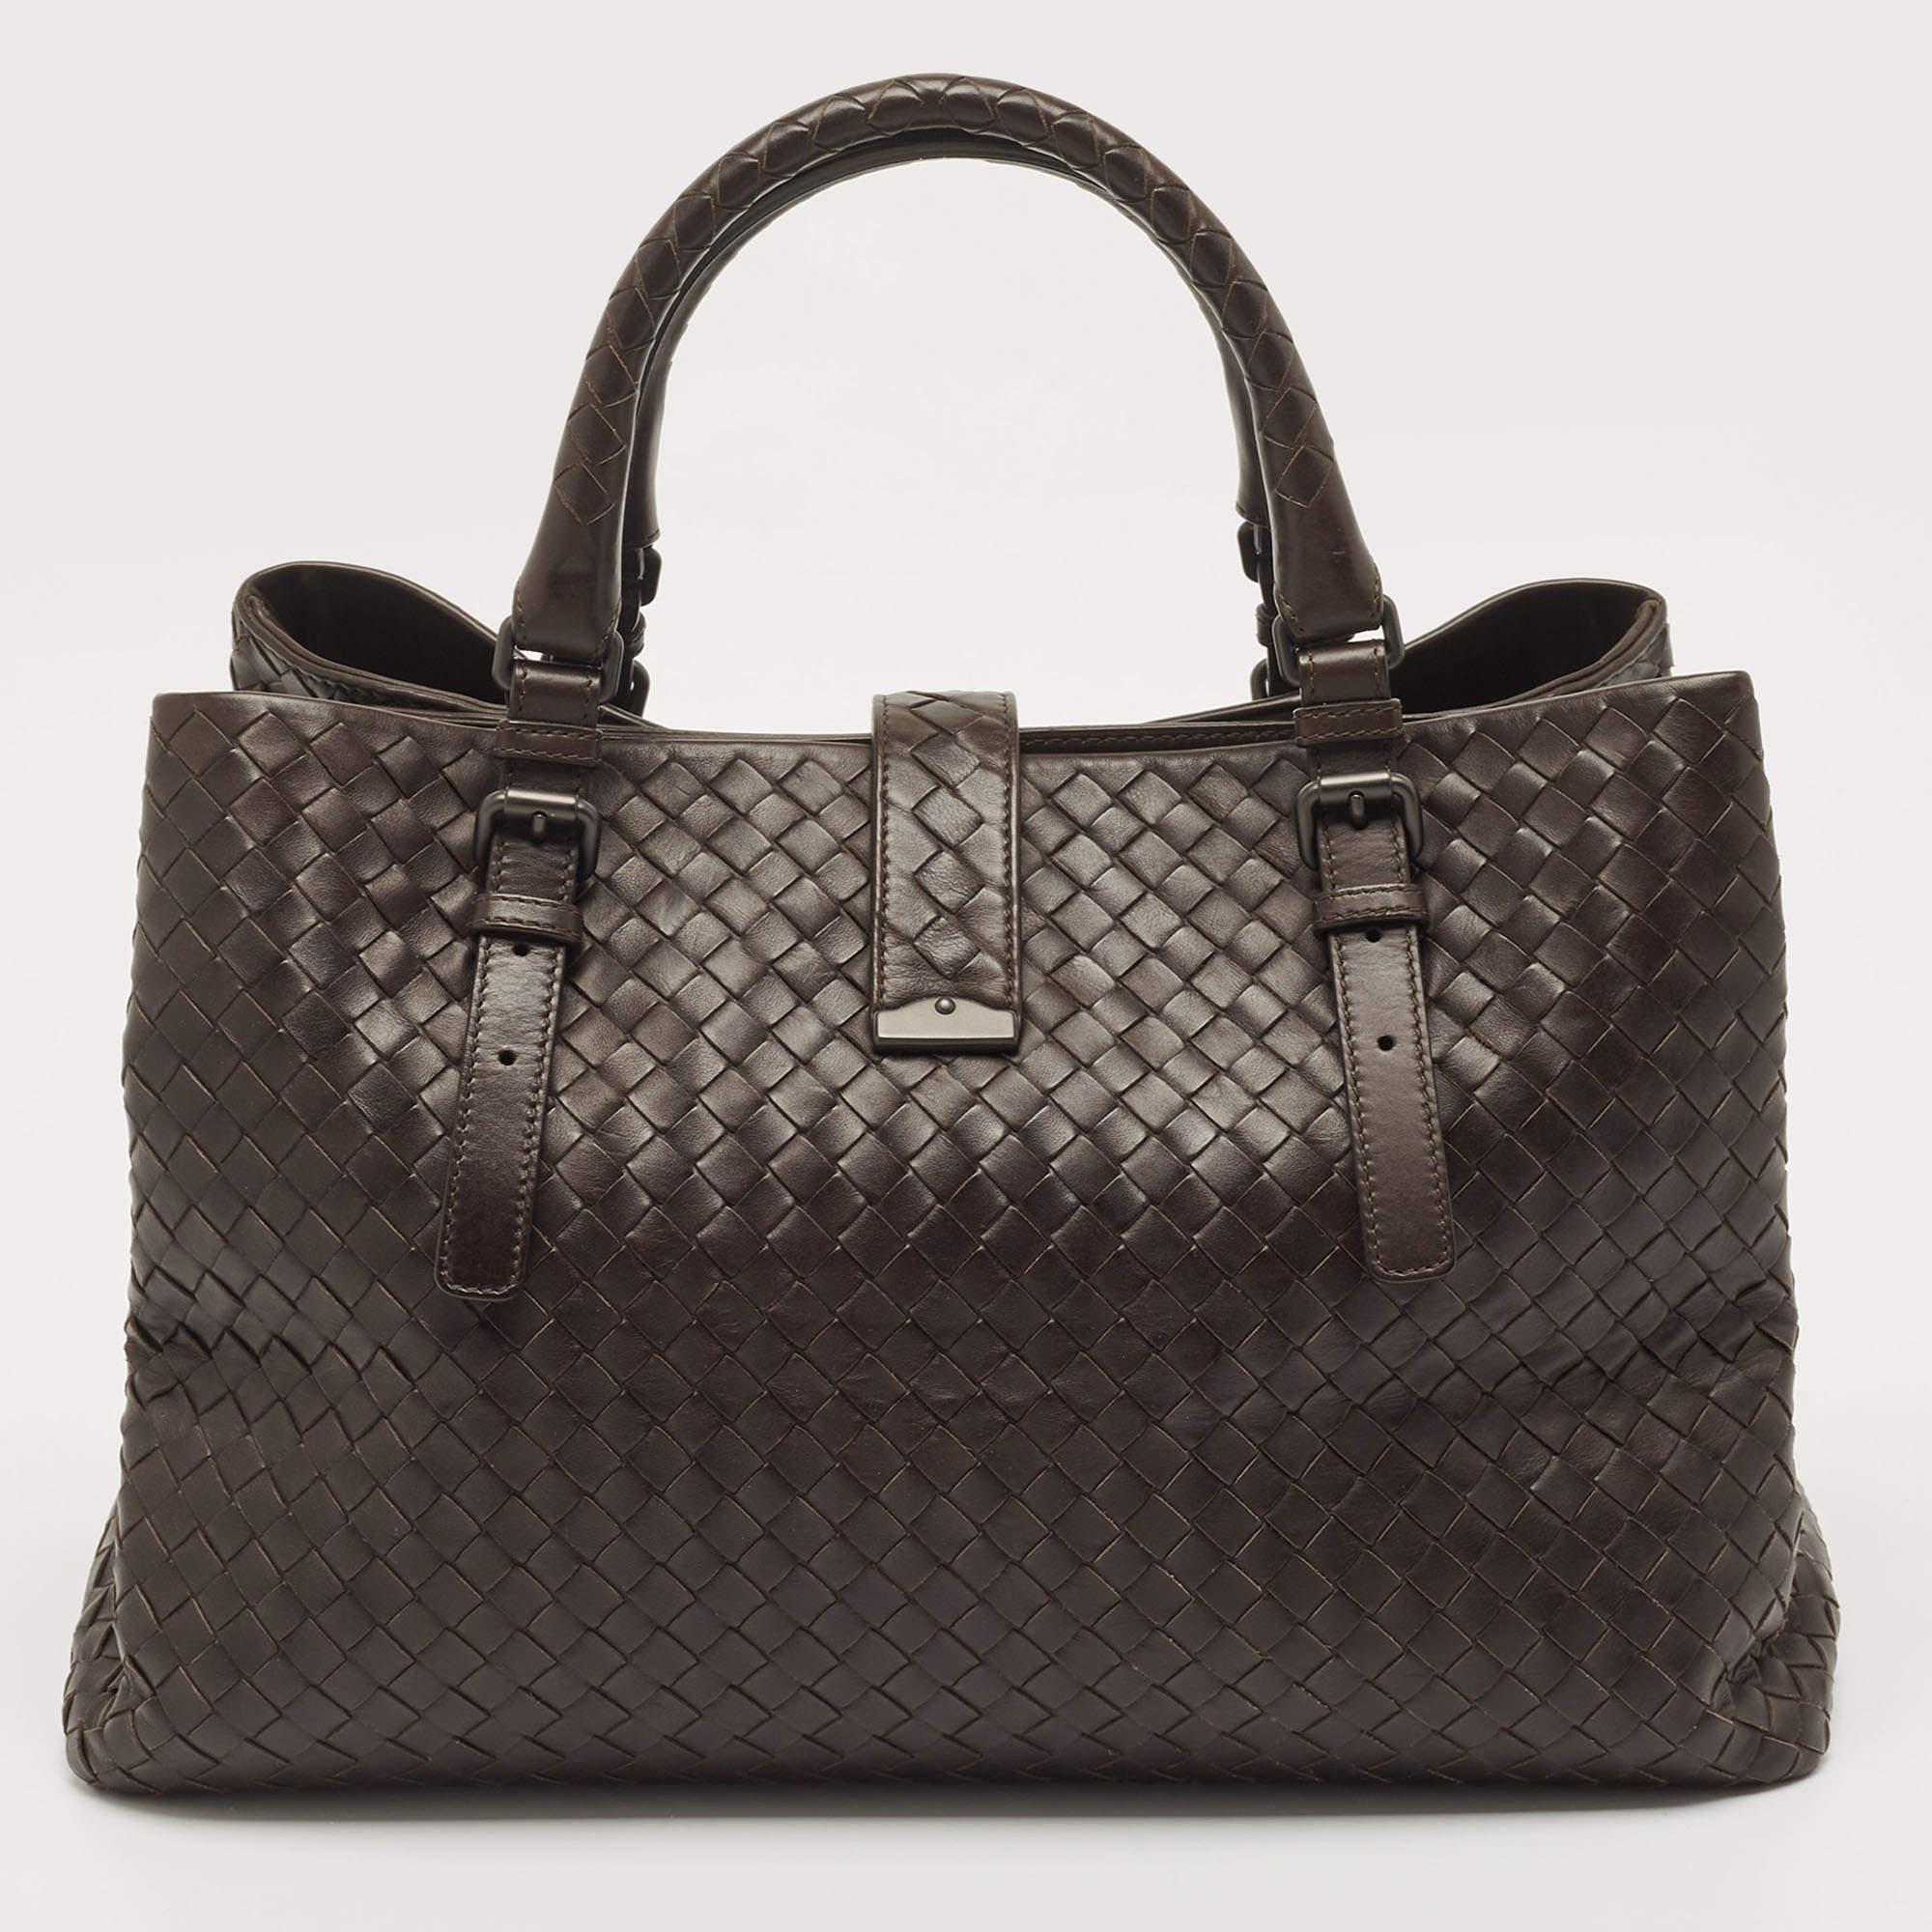 Striking a beautiful balance between essentiality and opulence, this tote from the House of Bottega Veneta ensures that your handbag requirements are taken care of. It is equipped with practical features for all-day ease.

Includes: Info Booklet, Key